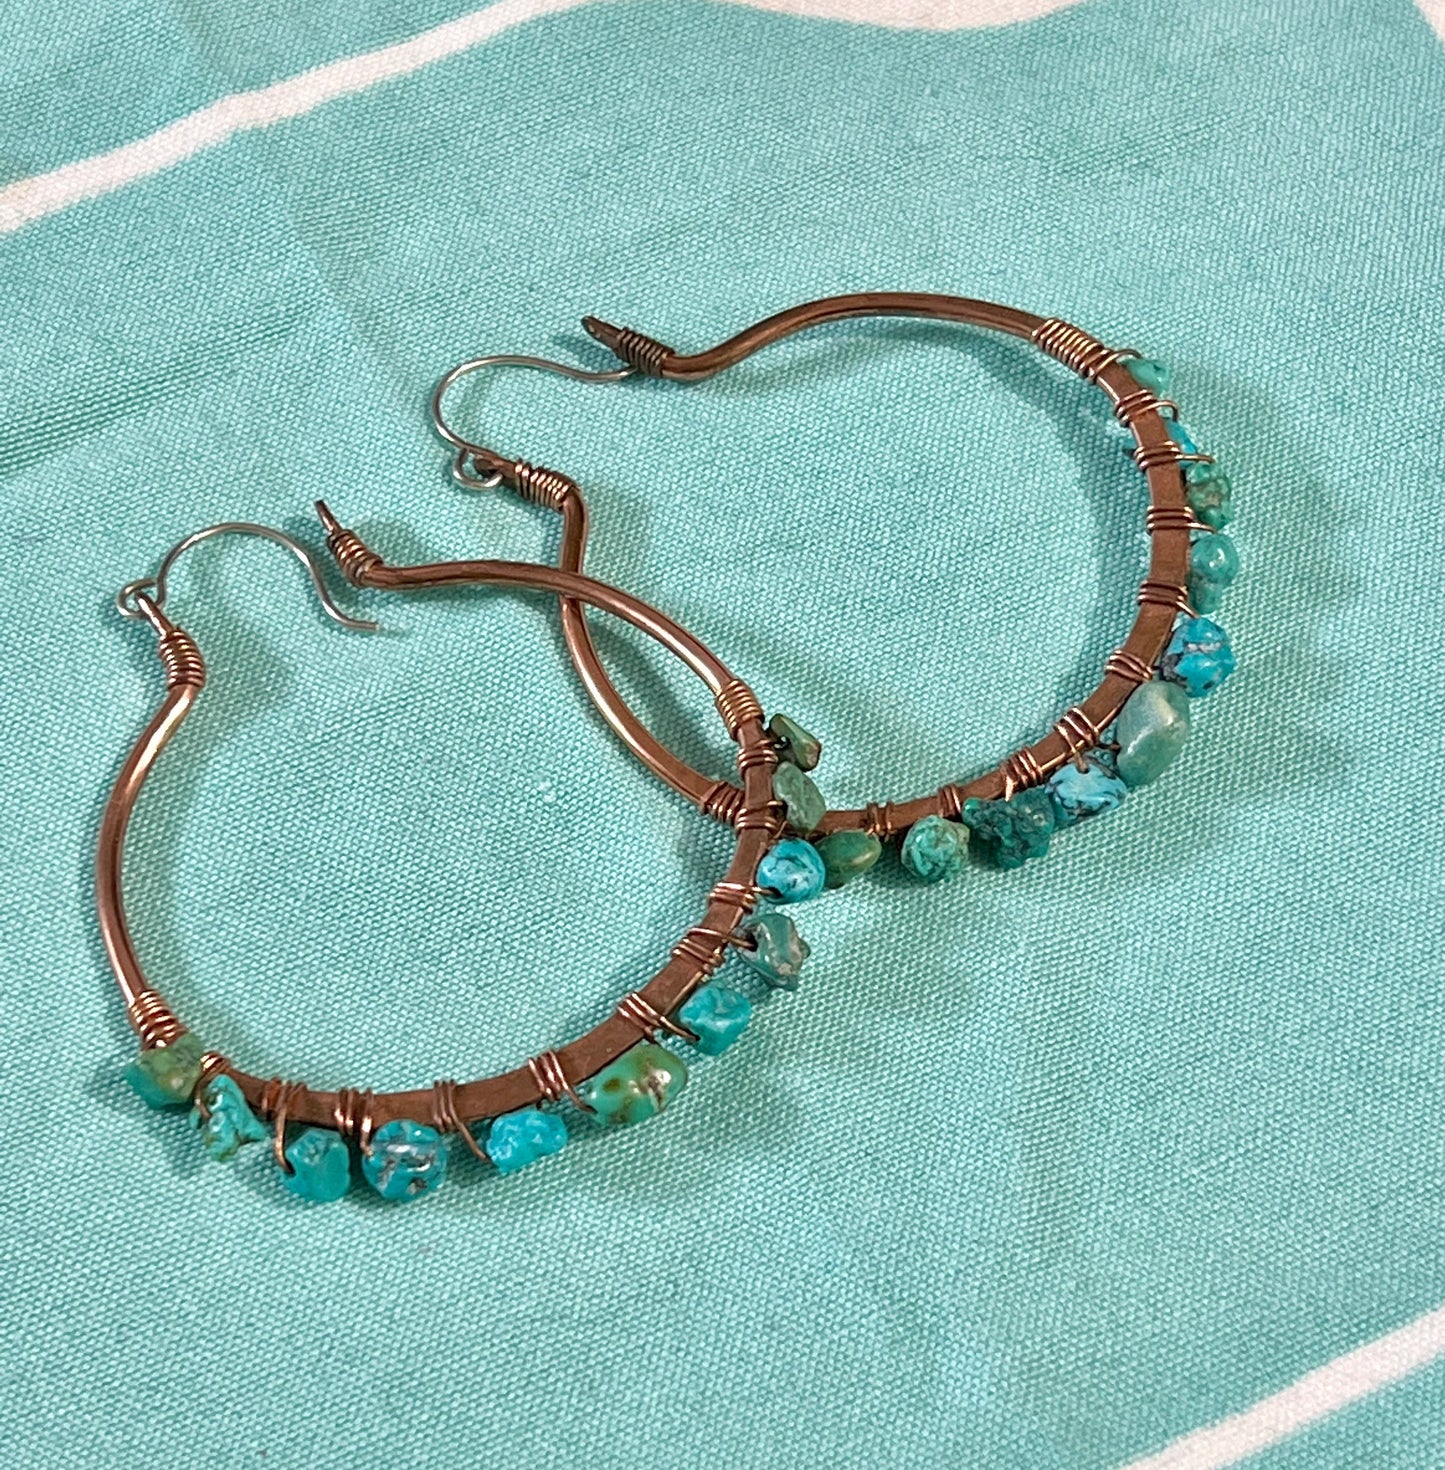 Boho Goddess Copper and Old Turquoise Wirewrapped Hoop Earrings